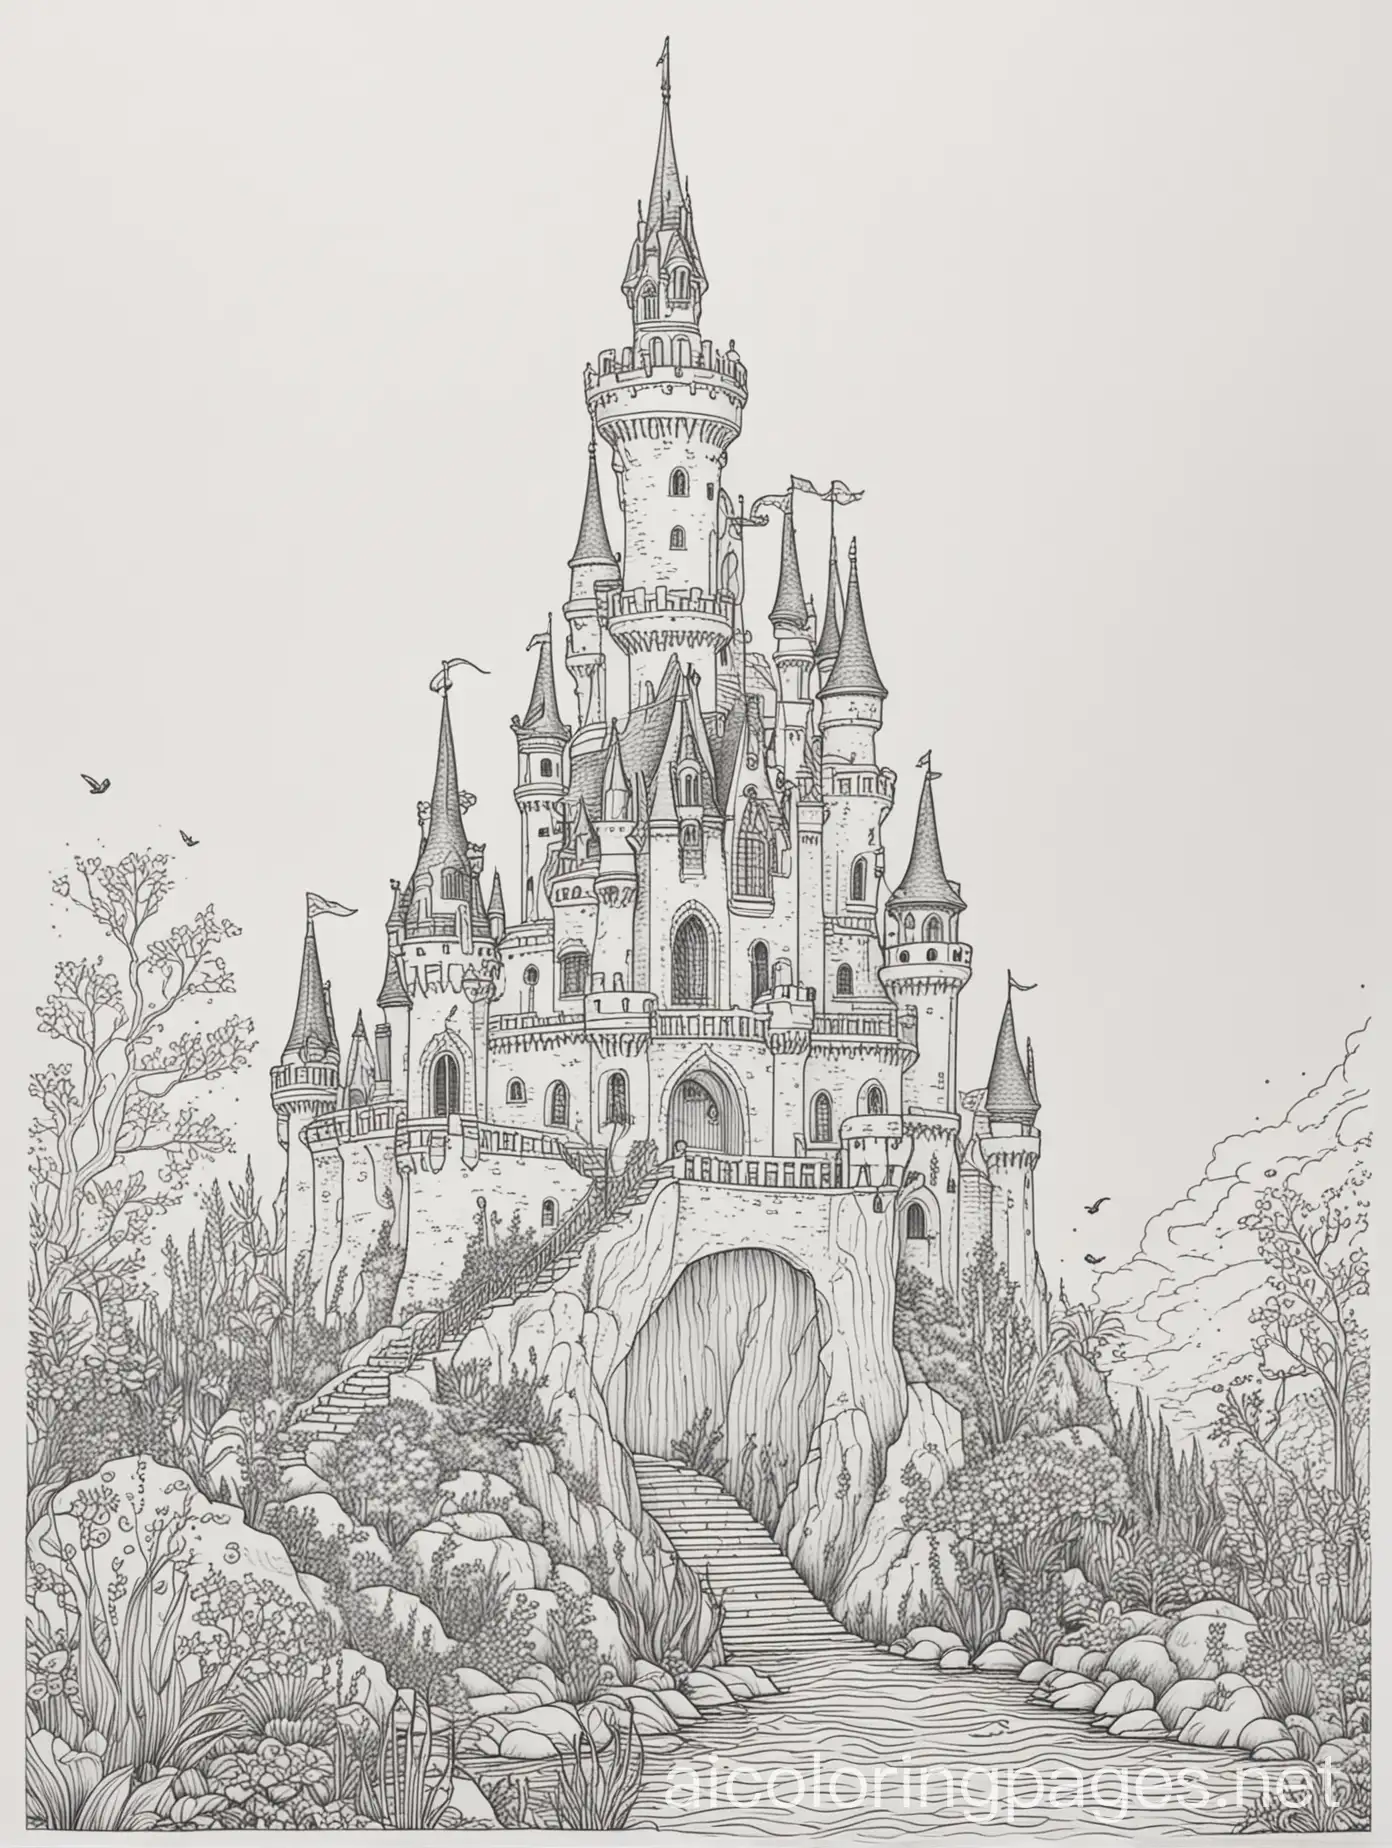 Ariel-Mermaid-Castle-Coloring-Page-Enchanting-Line-Art-on-White-Background